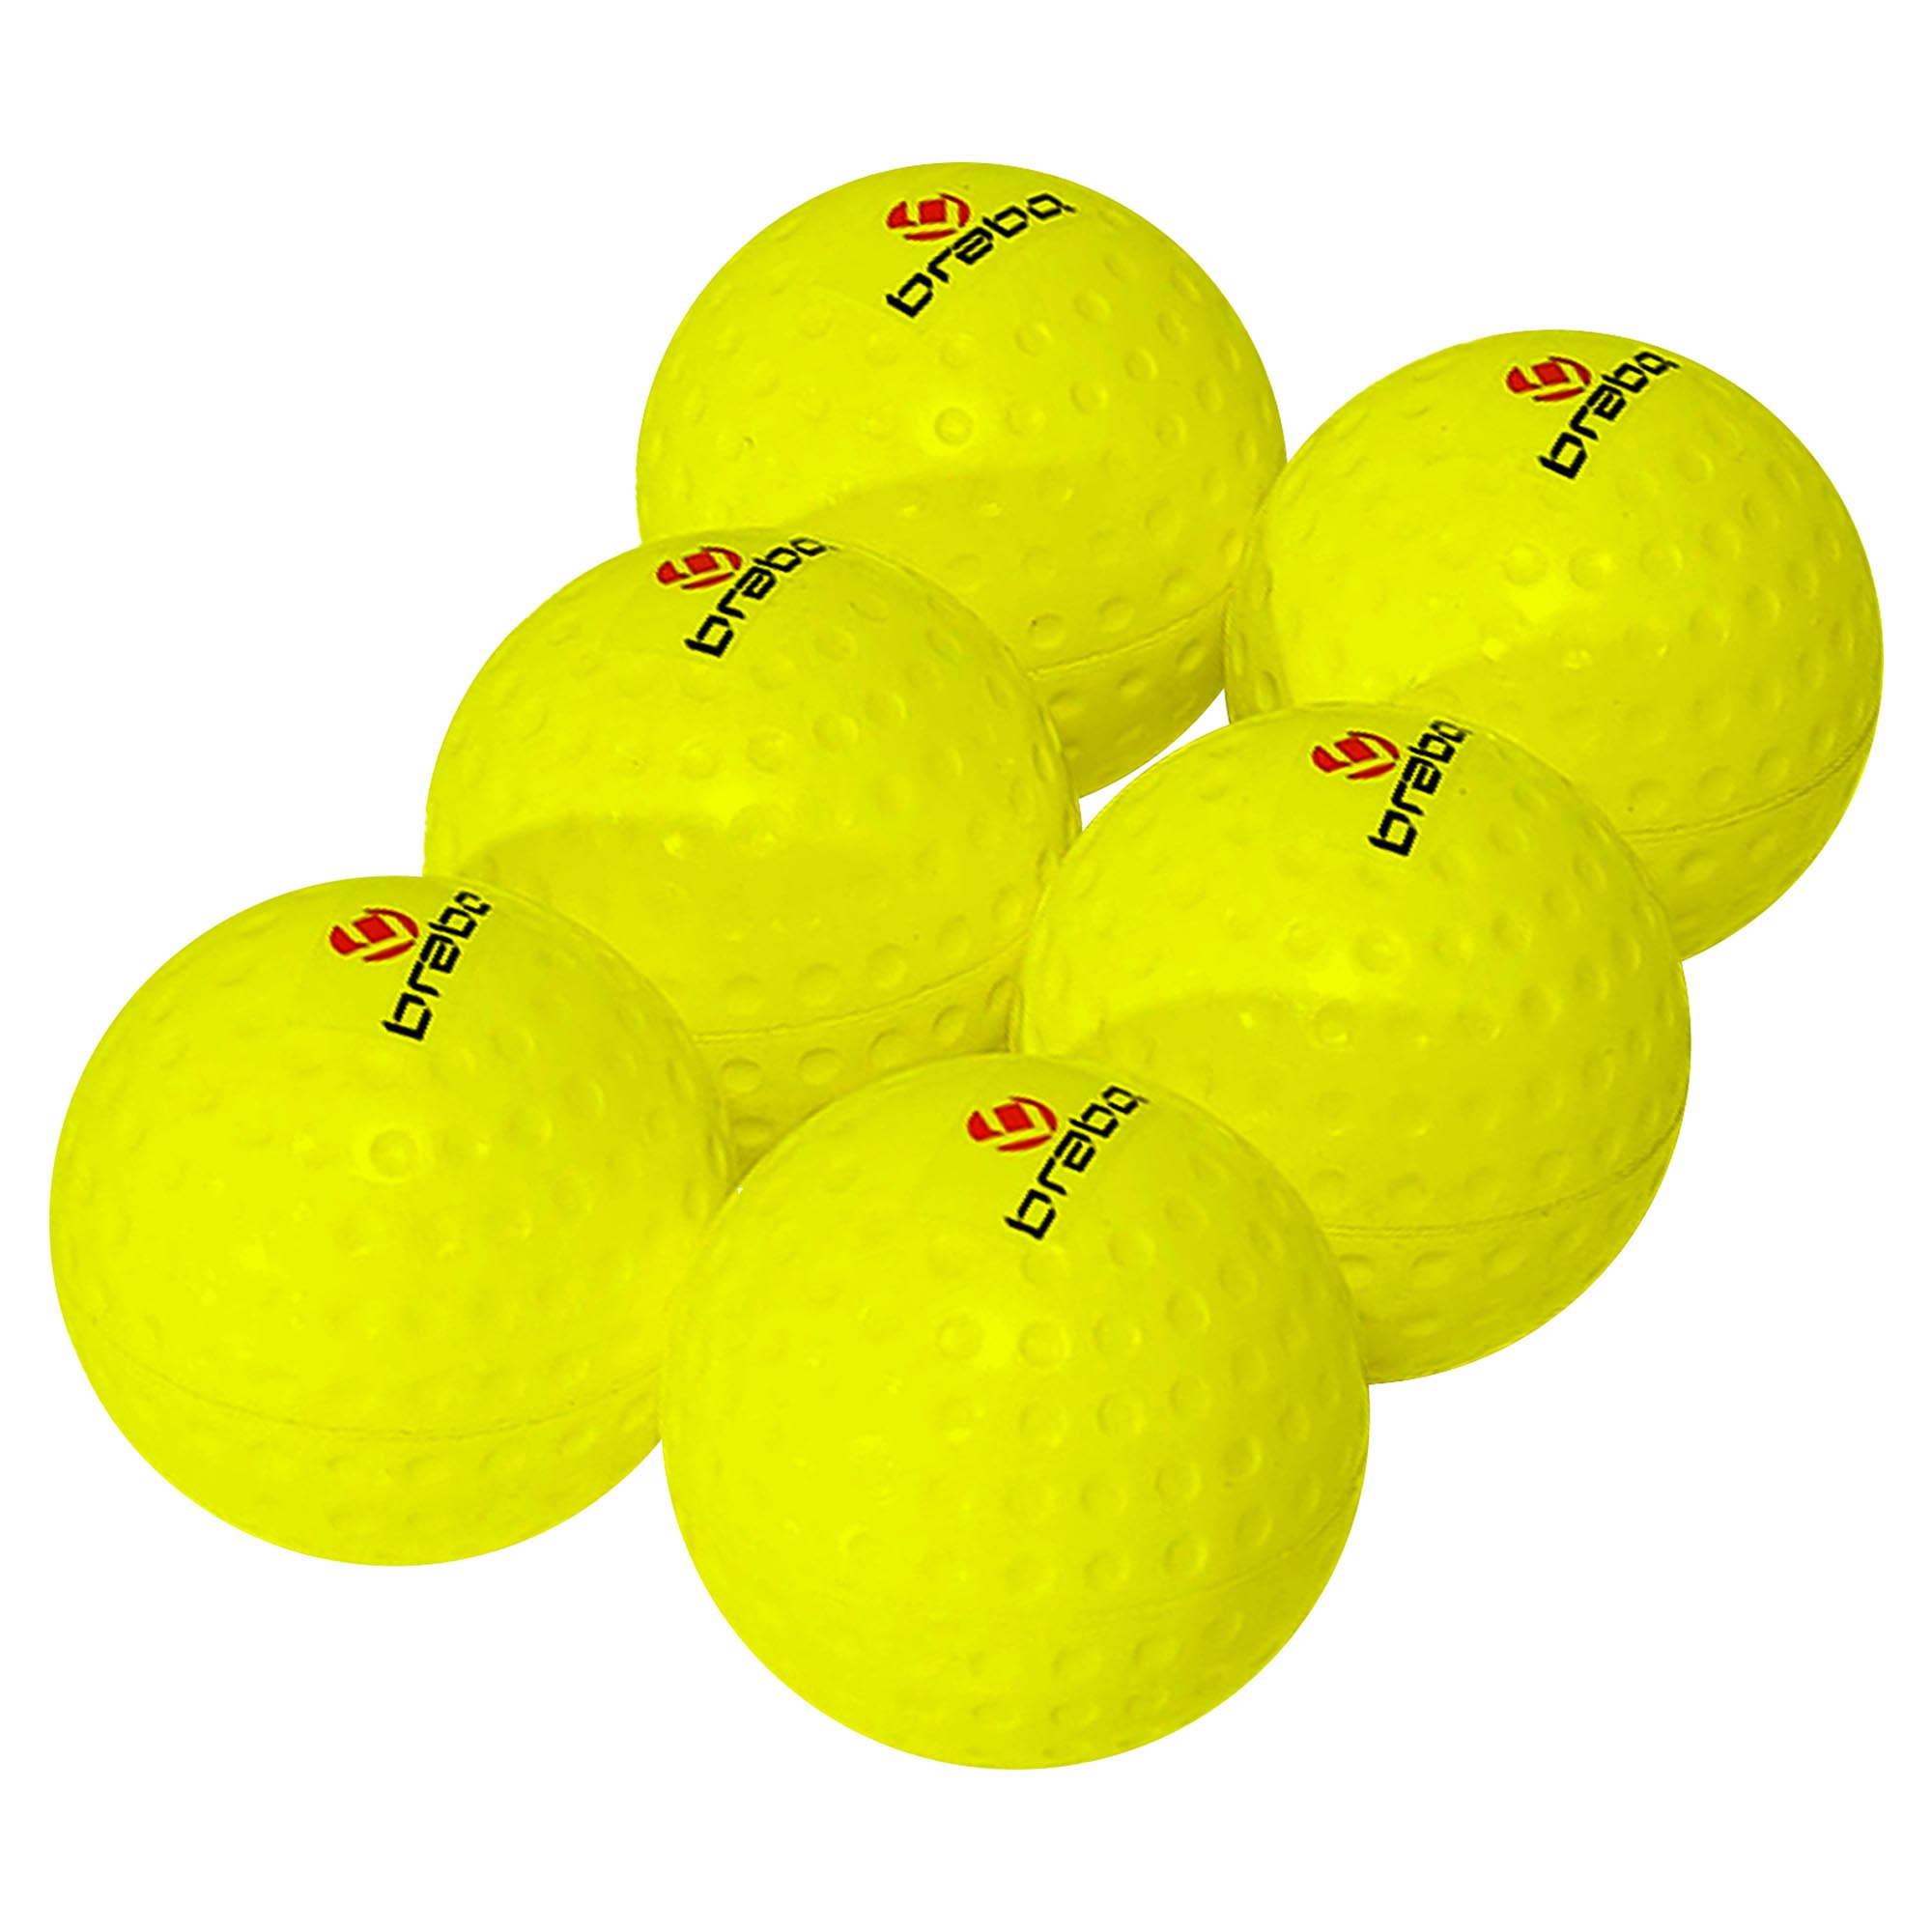 Comp Balls Dimple Neon Ylw